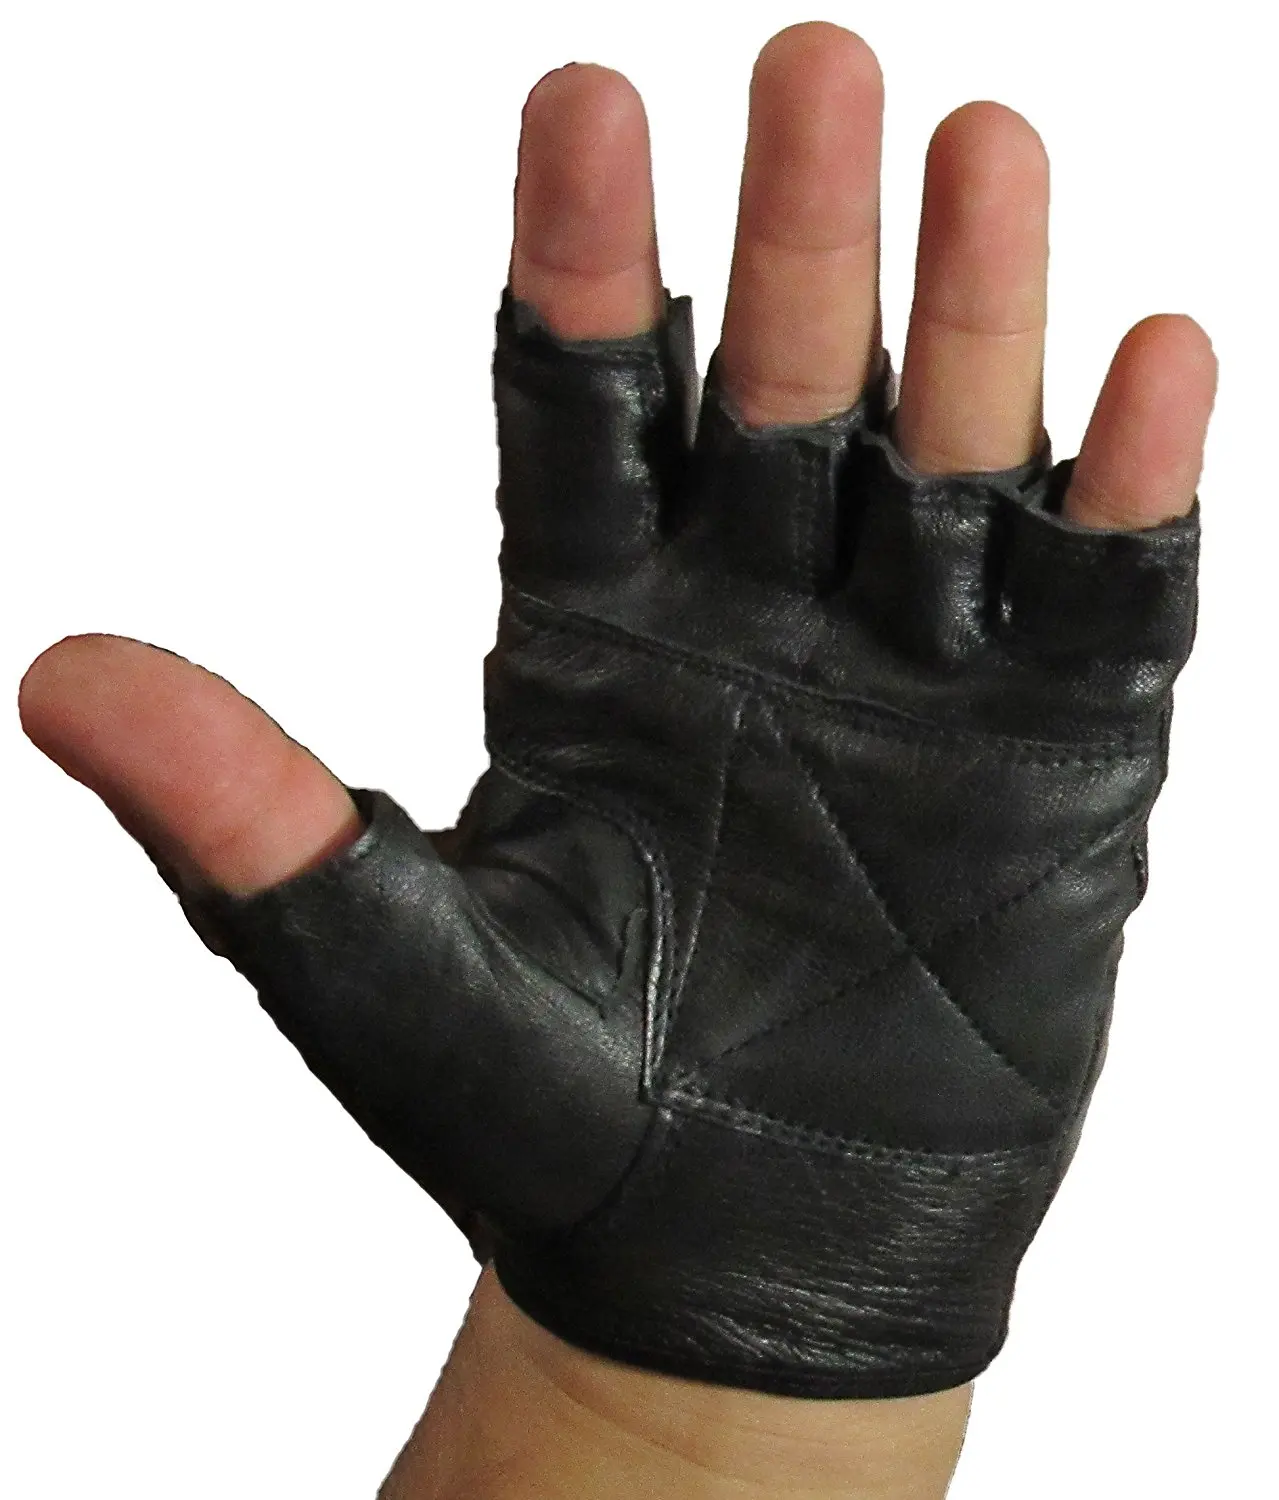 Charismatic Black Leather Padded Palm Weight Lifting Gloves Half Finger Fingerless Workout Cycling Gym Fitness